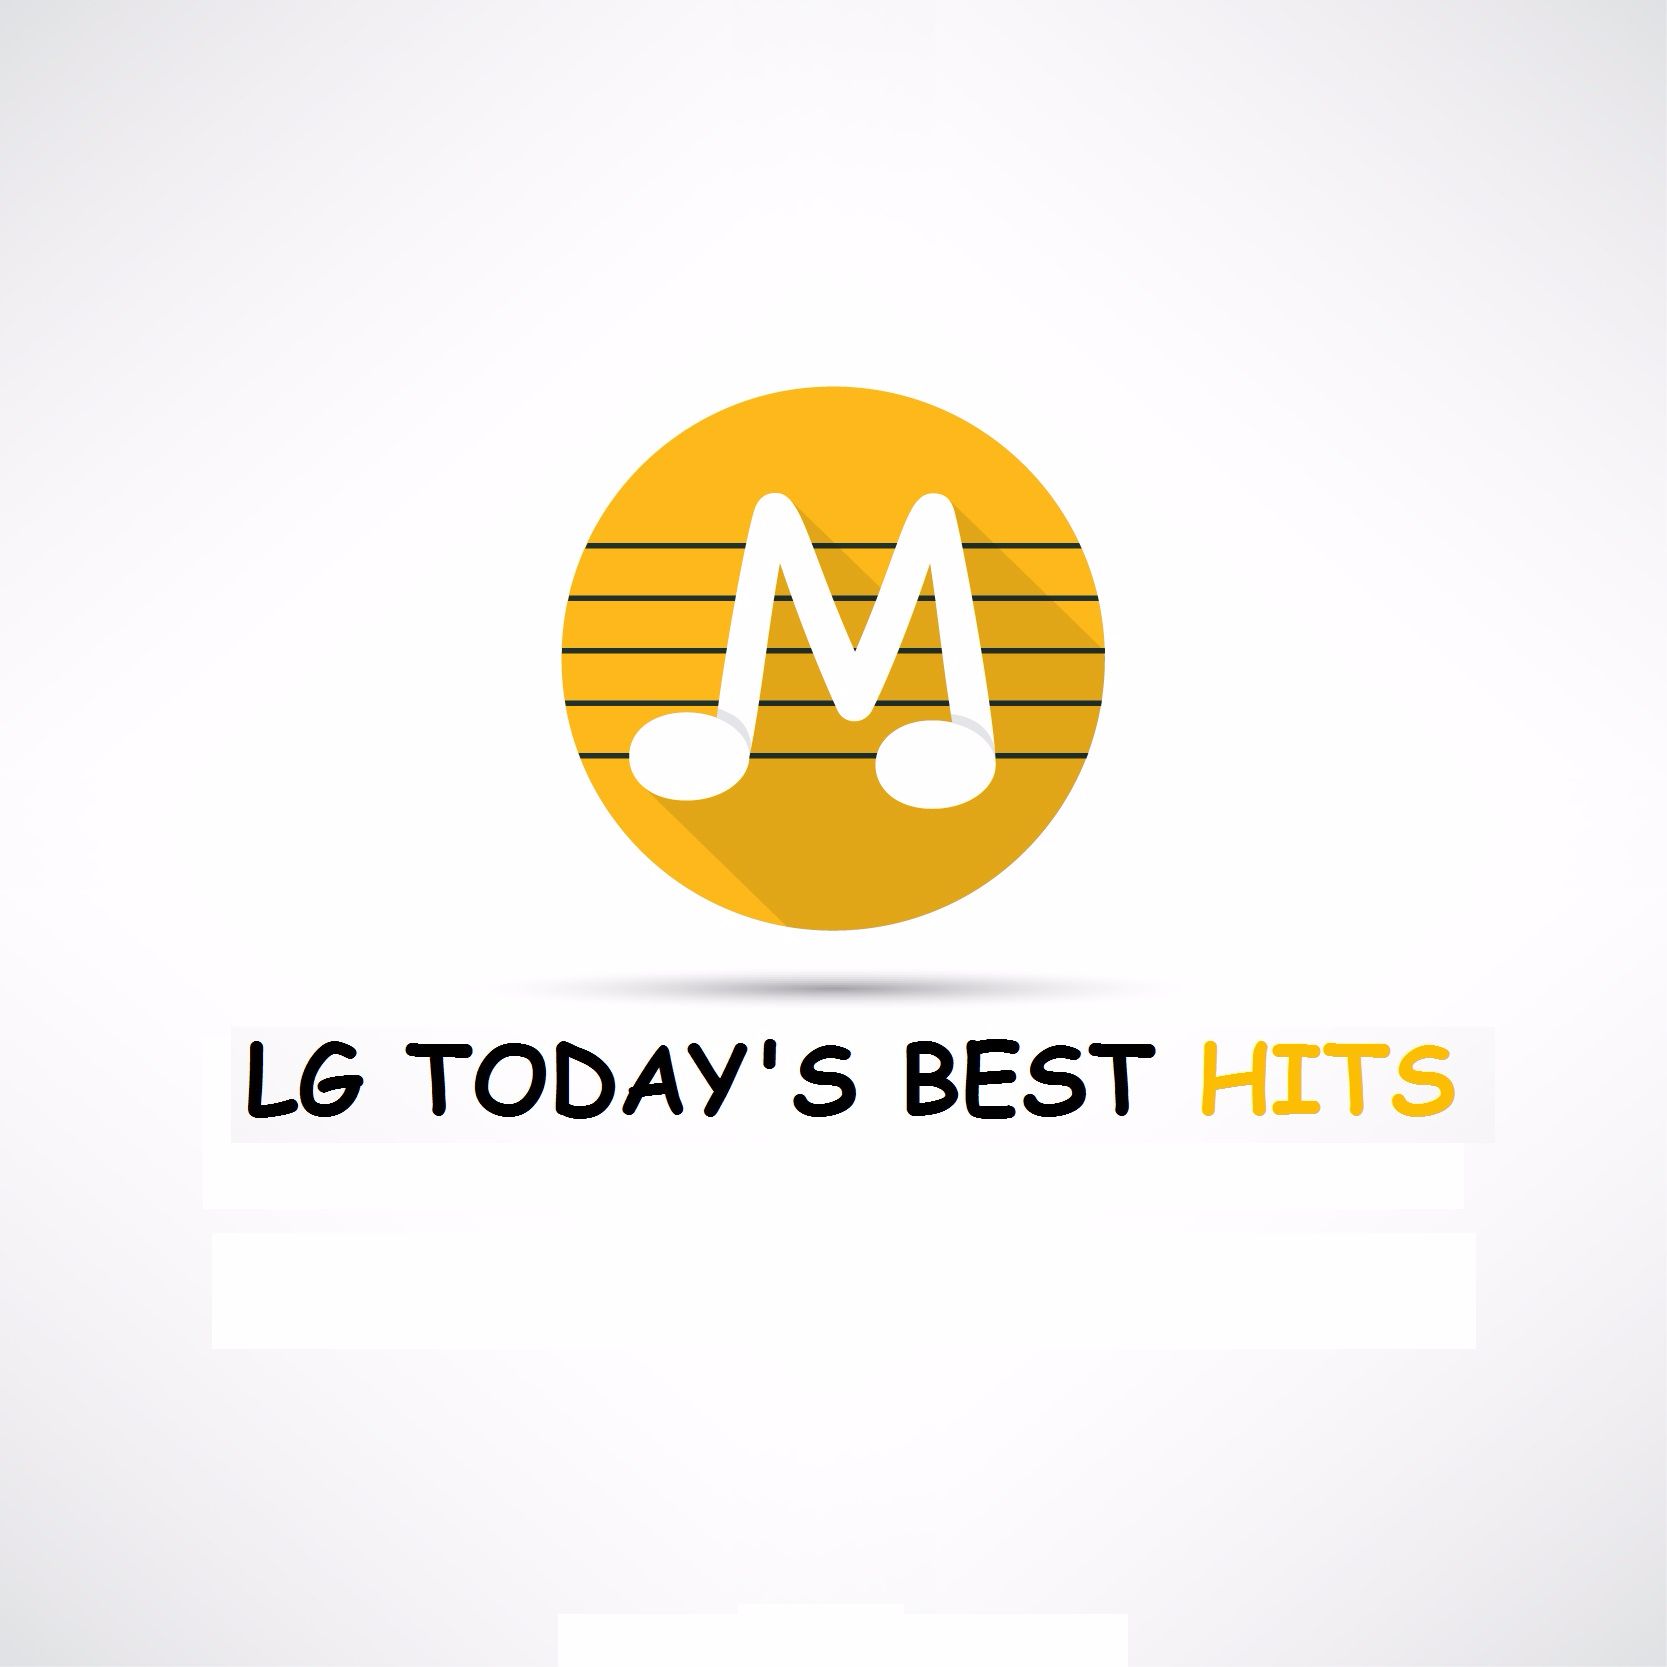 LG Today's Best Hits